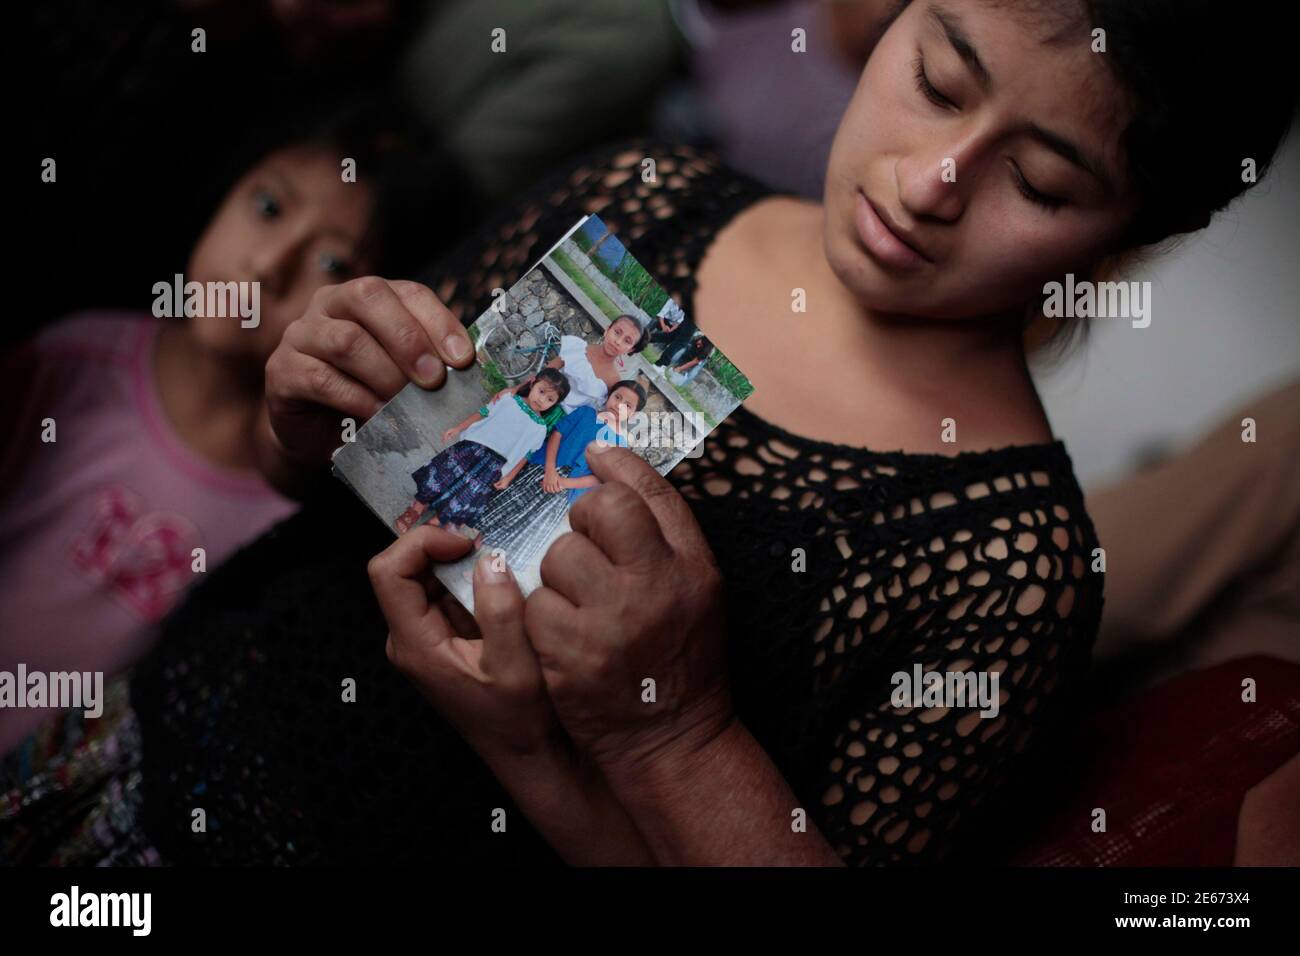 Otilia Bincoy, an aunt of 8-year-old Evelyn Yanisa Saquij Bin who was  killed by a man in a classroom at a primary school, shows a picture of  Evelyn (wearing a blue top)